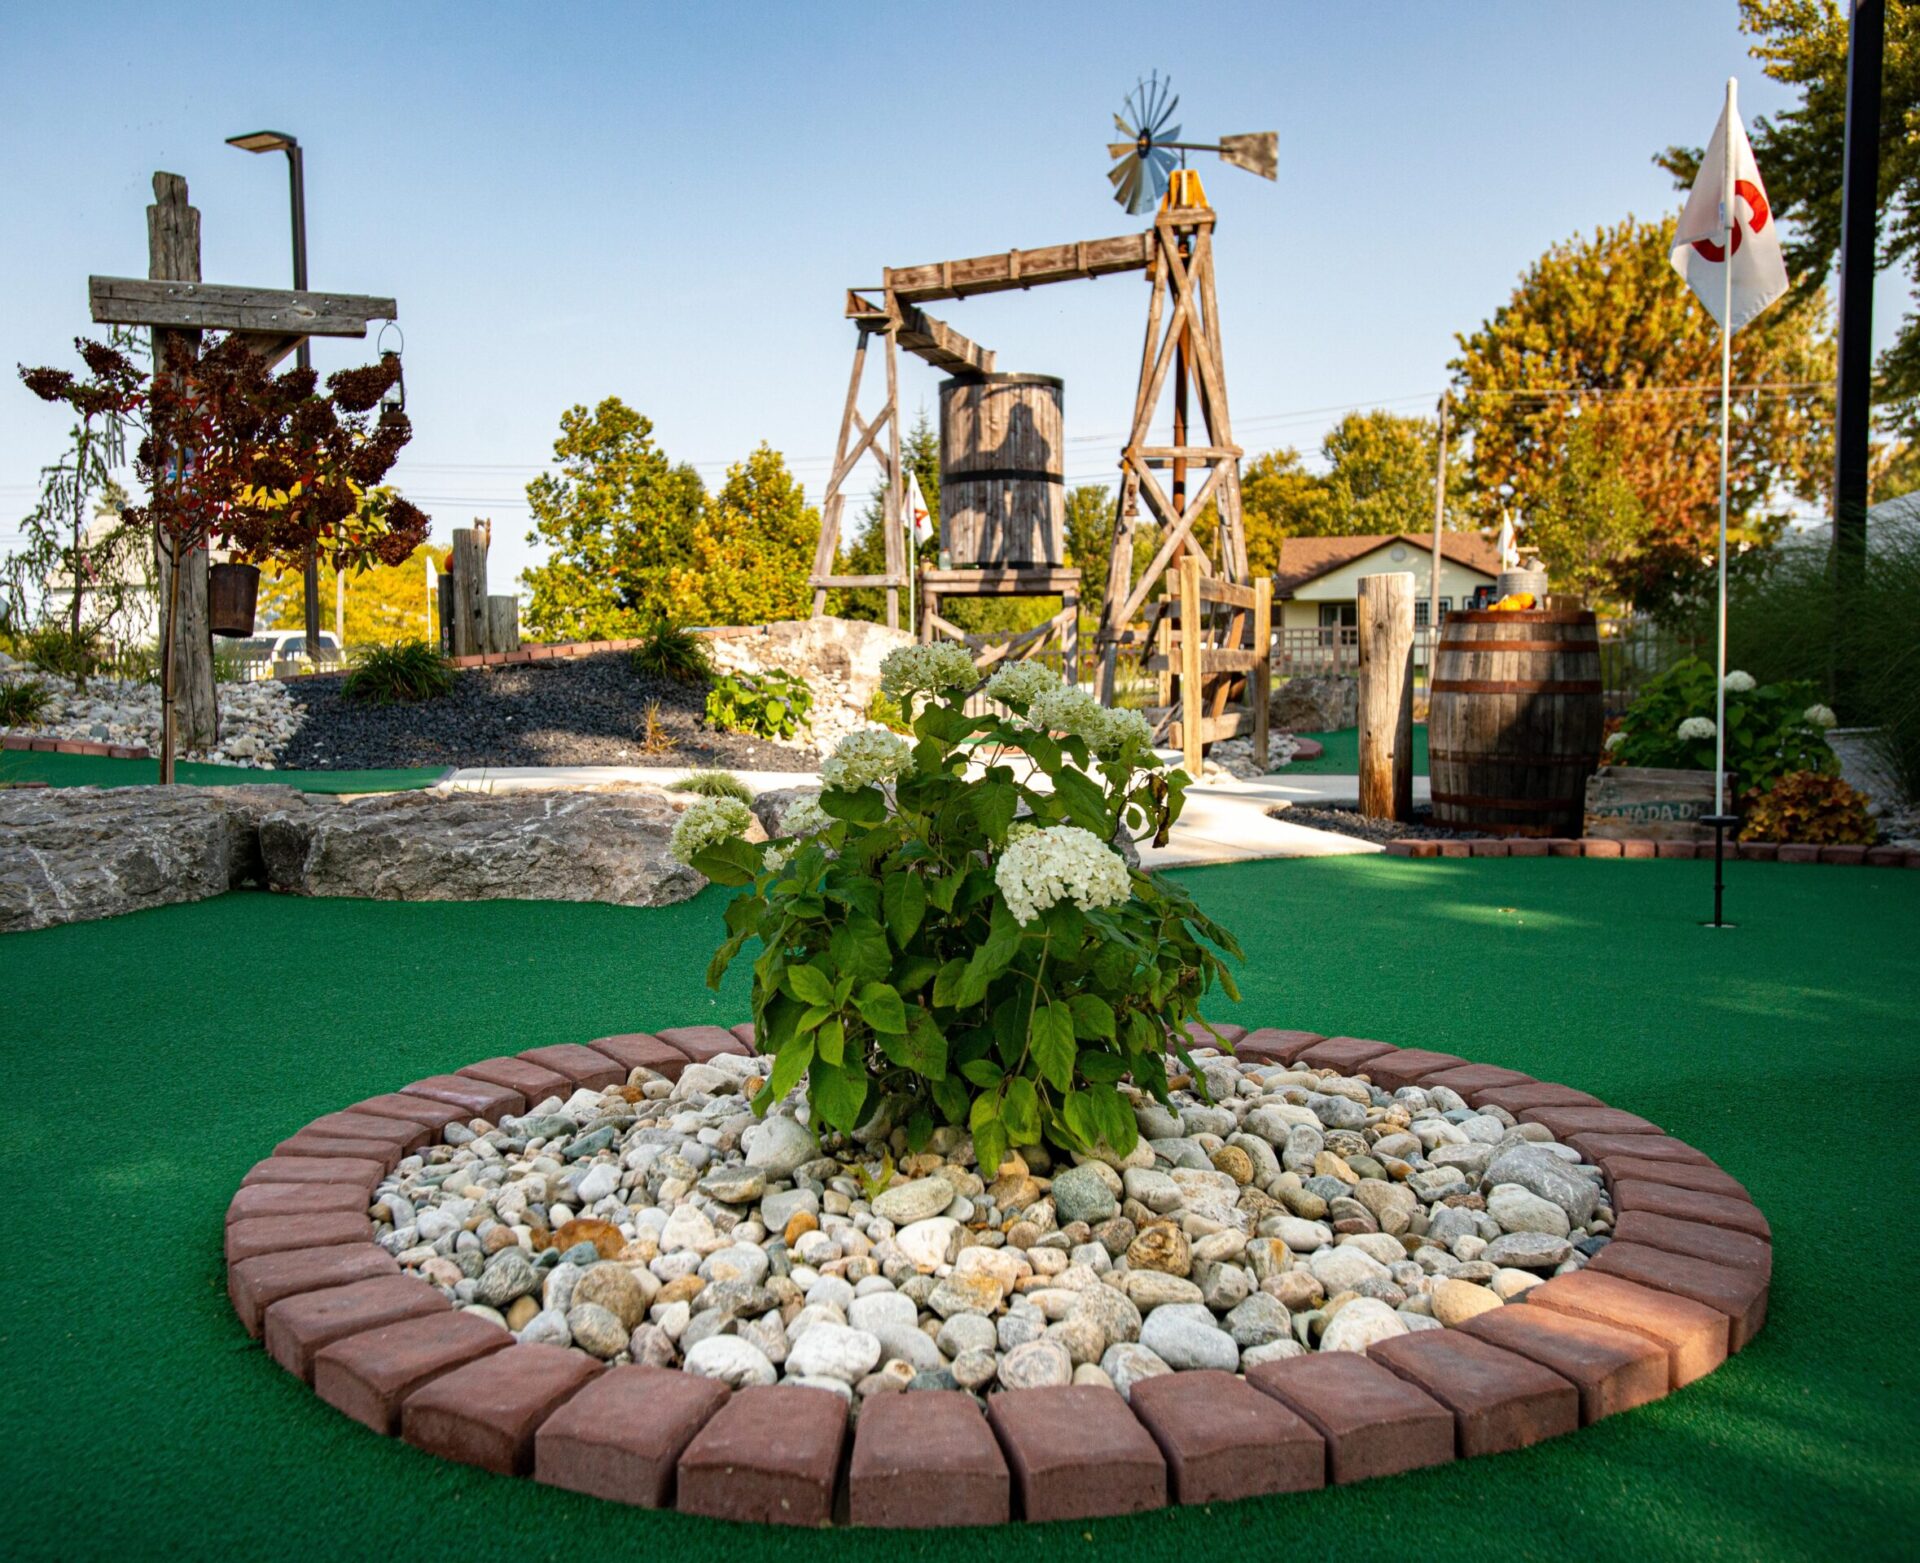 A miniature golf course with green artificial turf, decorative stonework, a wooden windmill, and a white flag on a sunny day.